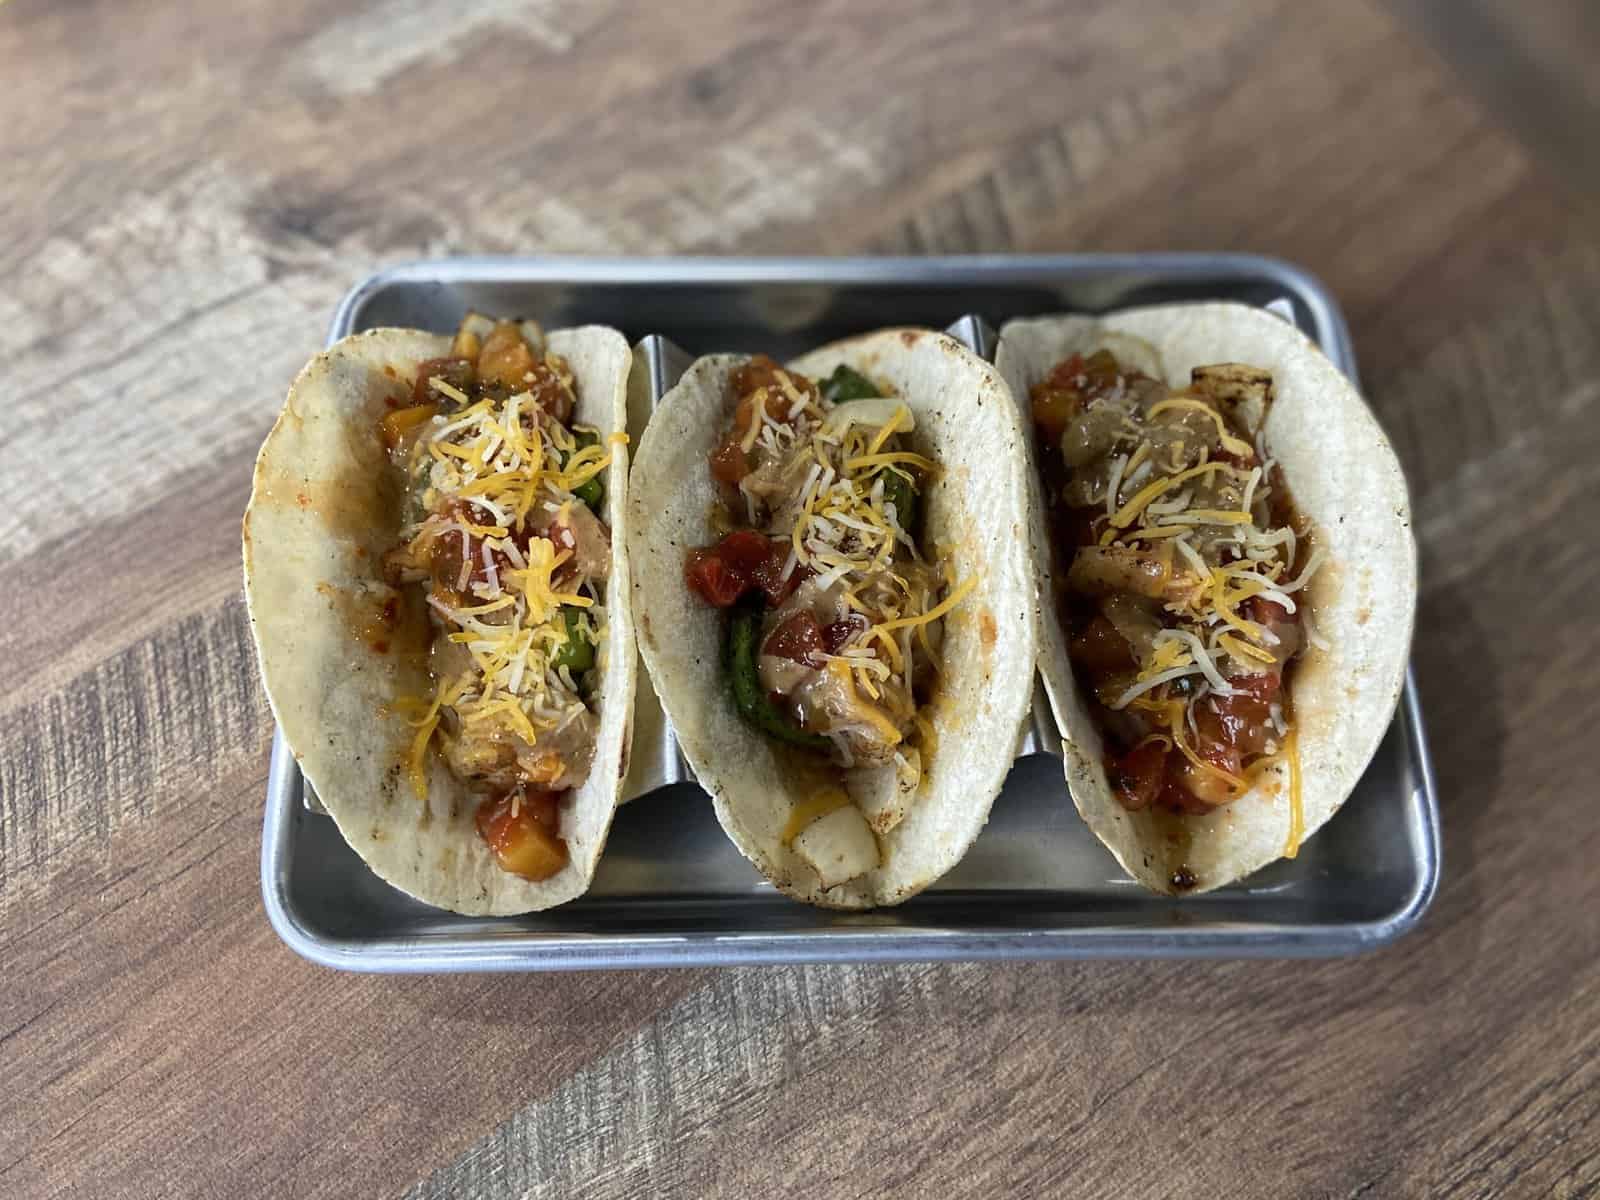 Food Trail #6: Tacos in Stamford, Connecticut